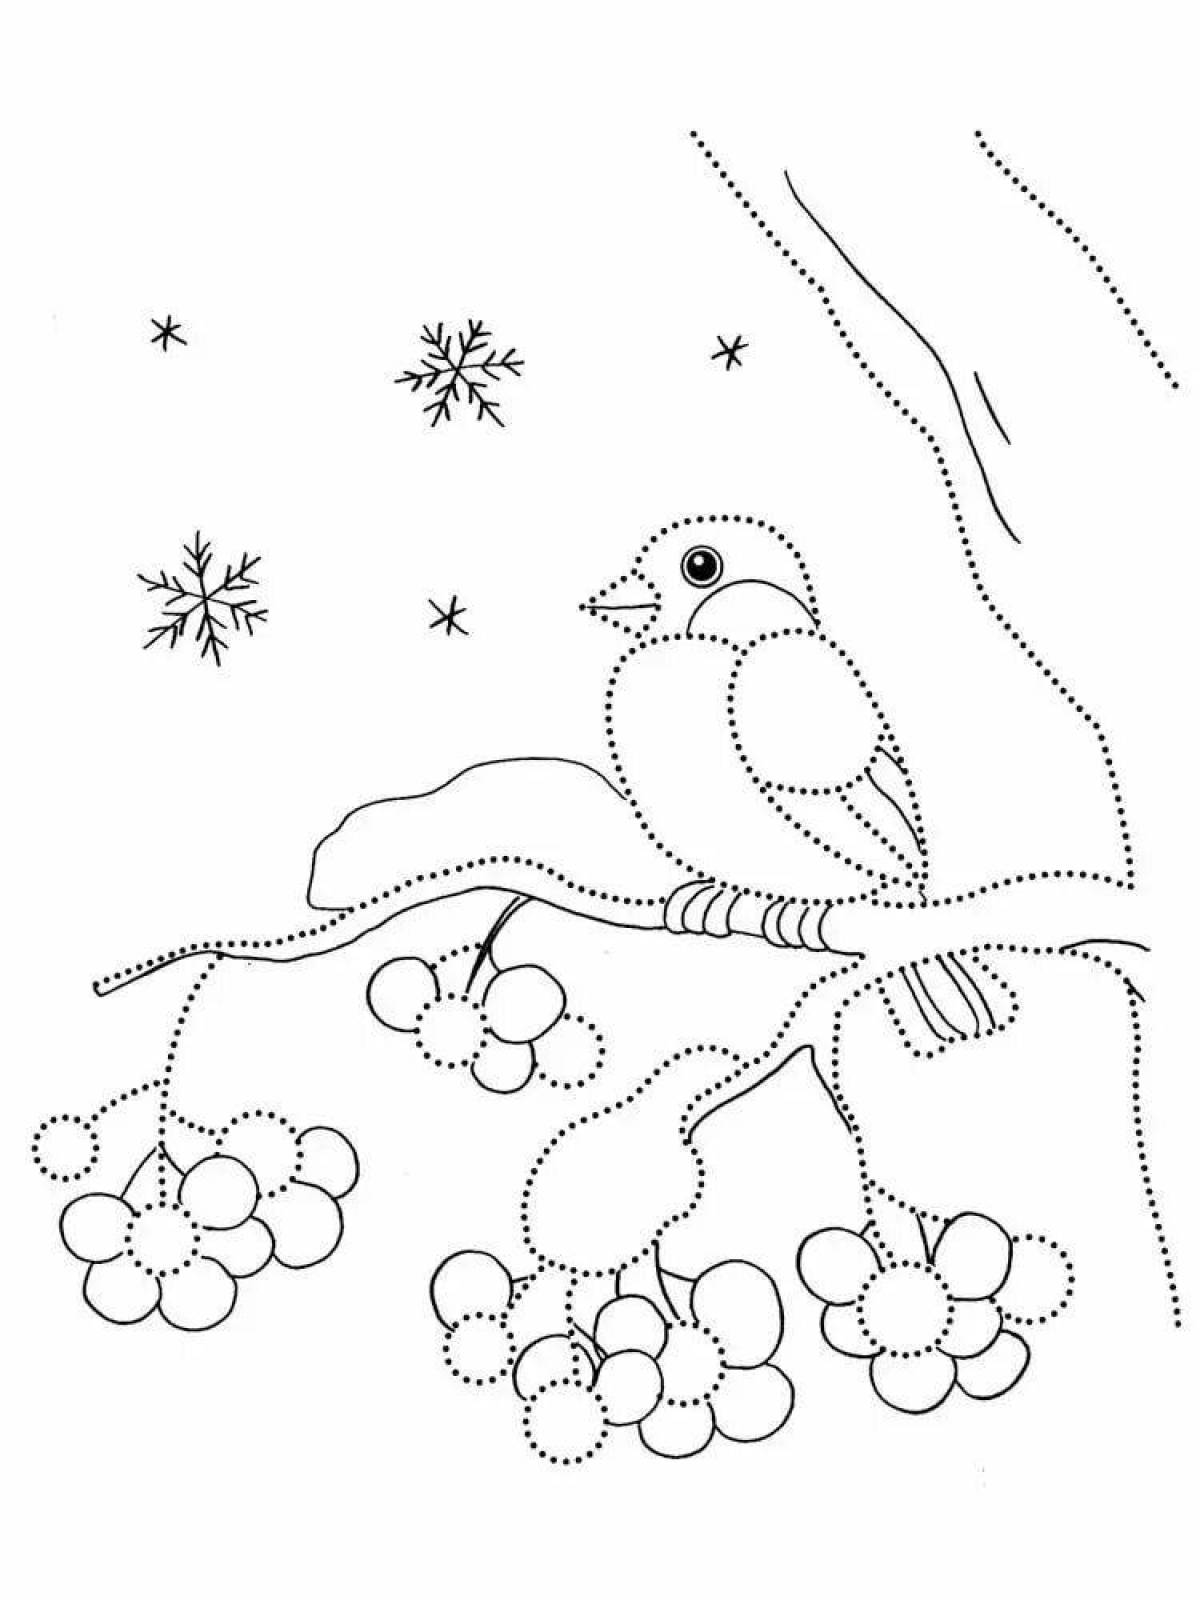 Impressive drawing of a bullfinch coloring page